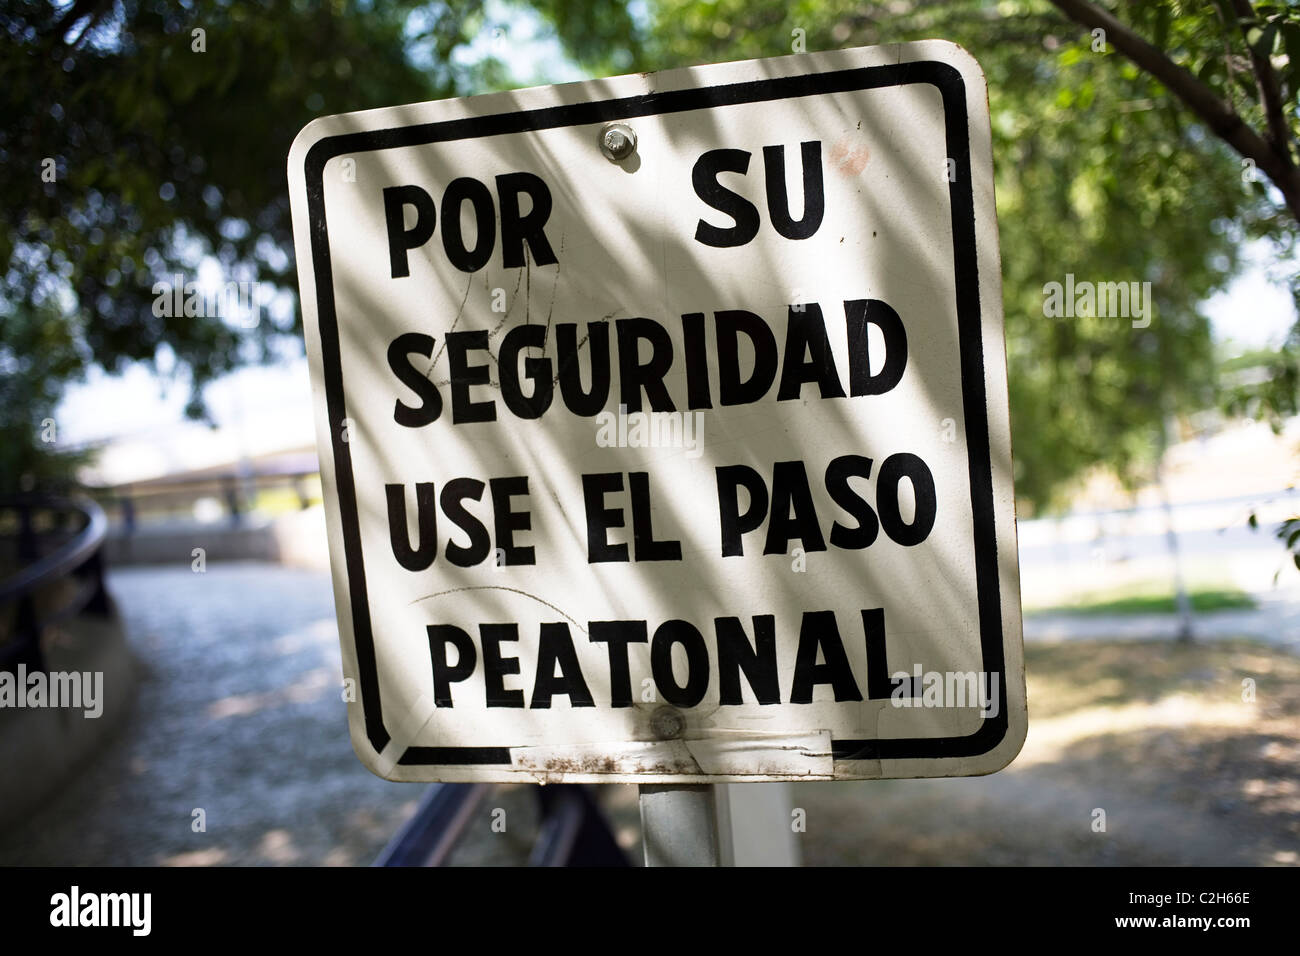 Use the pedestrian footpath sign in Spanish. Stock Photo